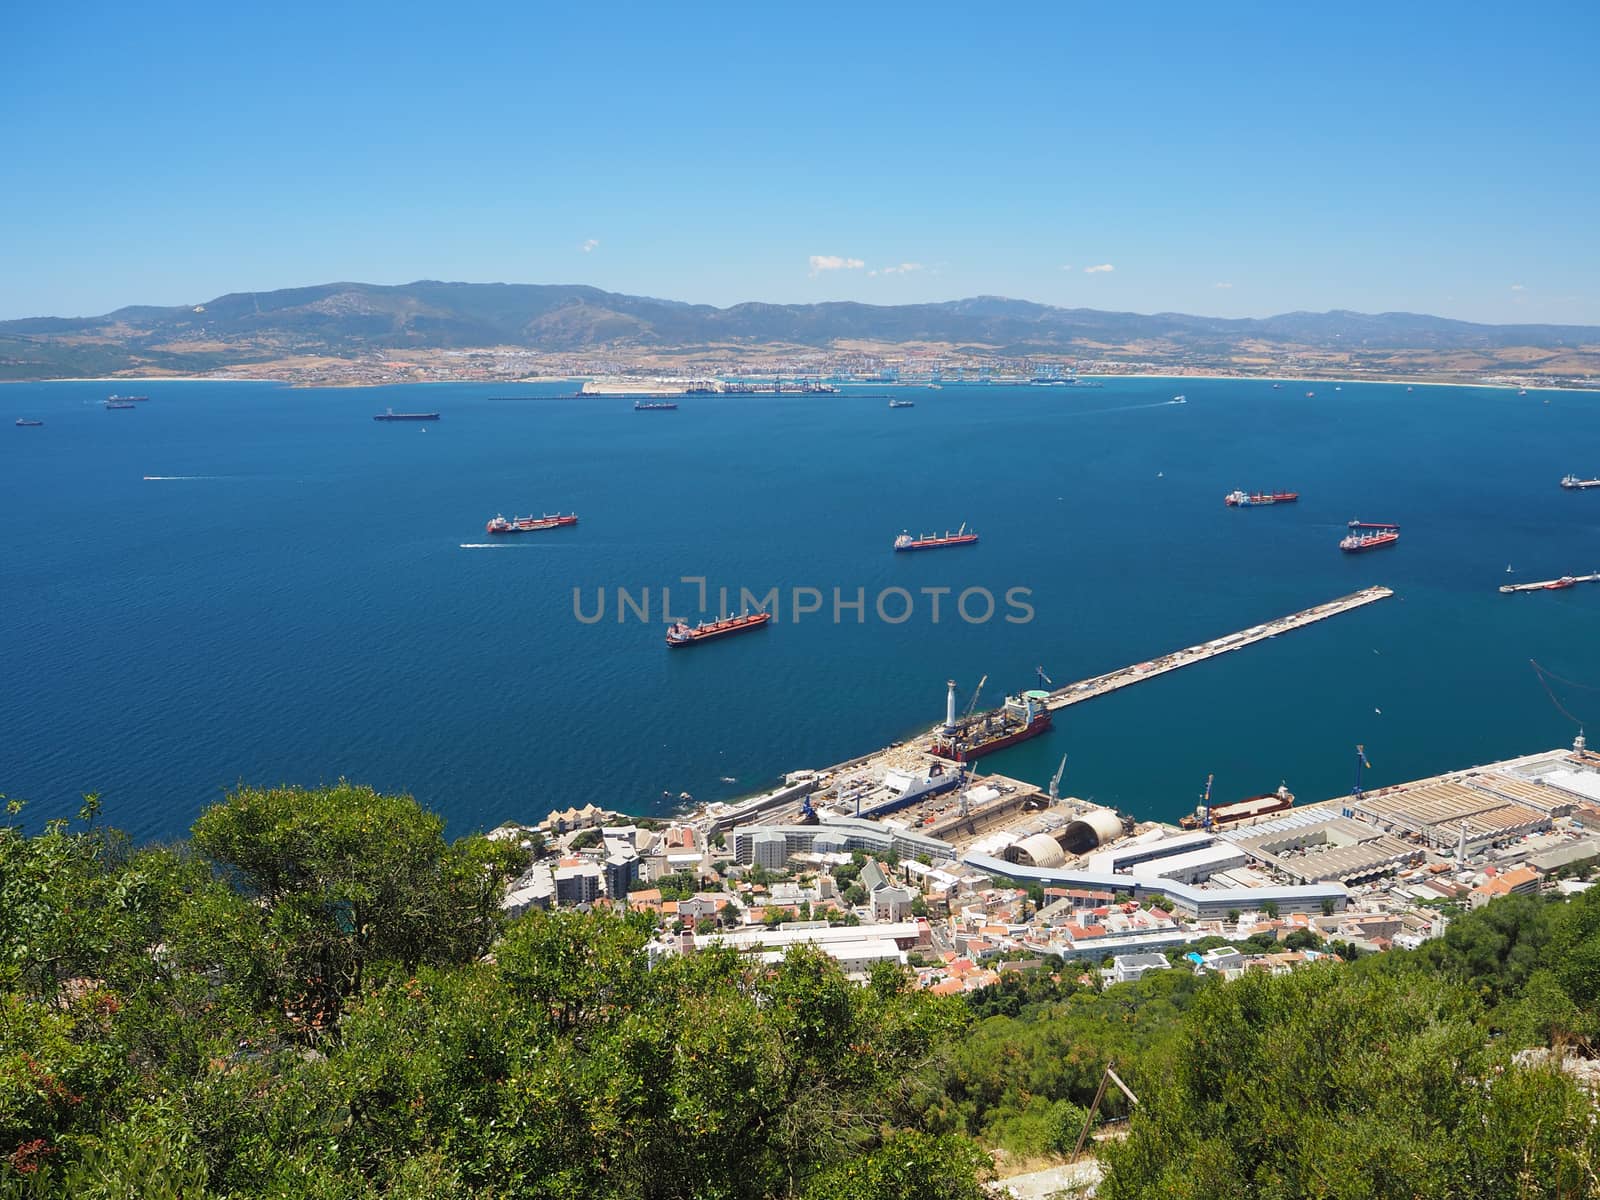 Container and cargo ships around the Rock of Gibraltar with the port of Algeciras, Spain, in the background